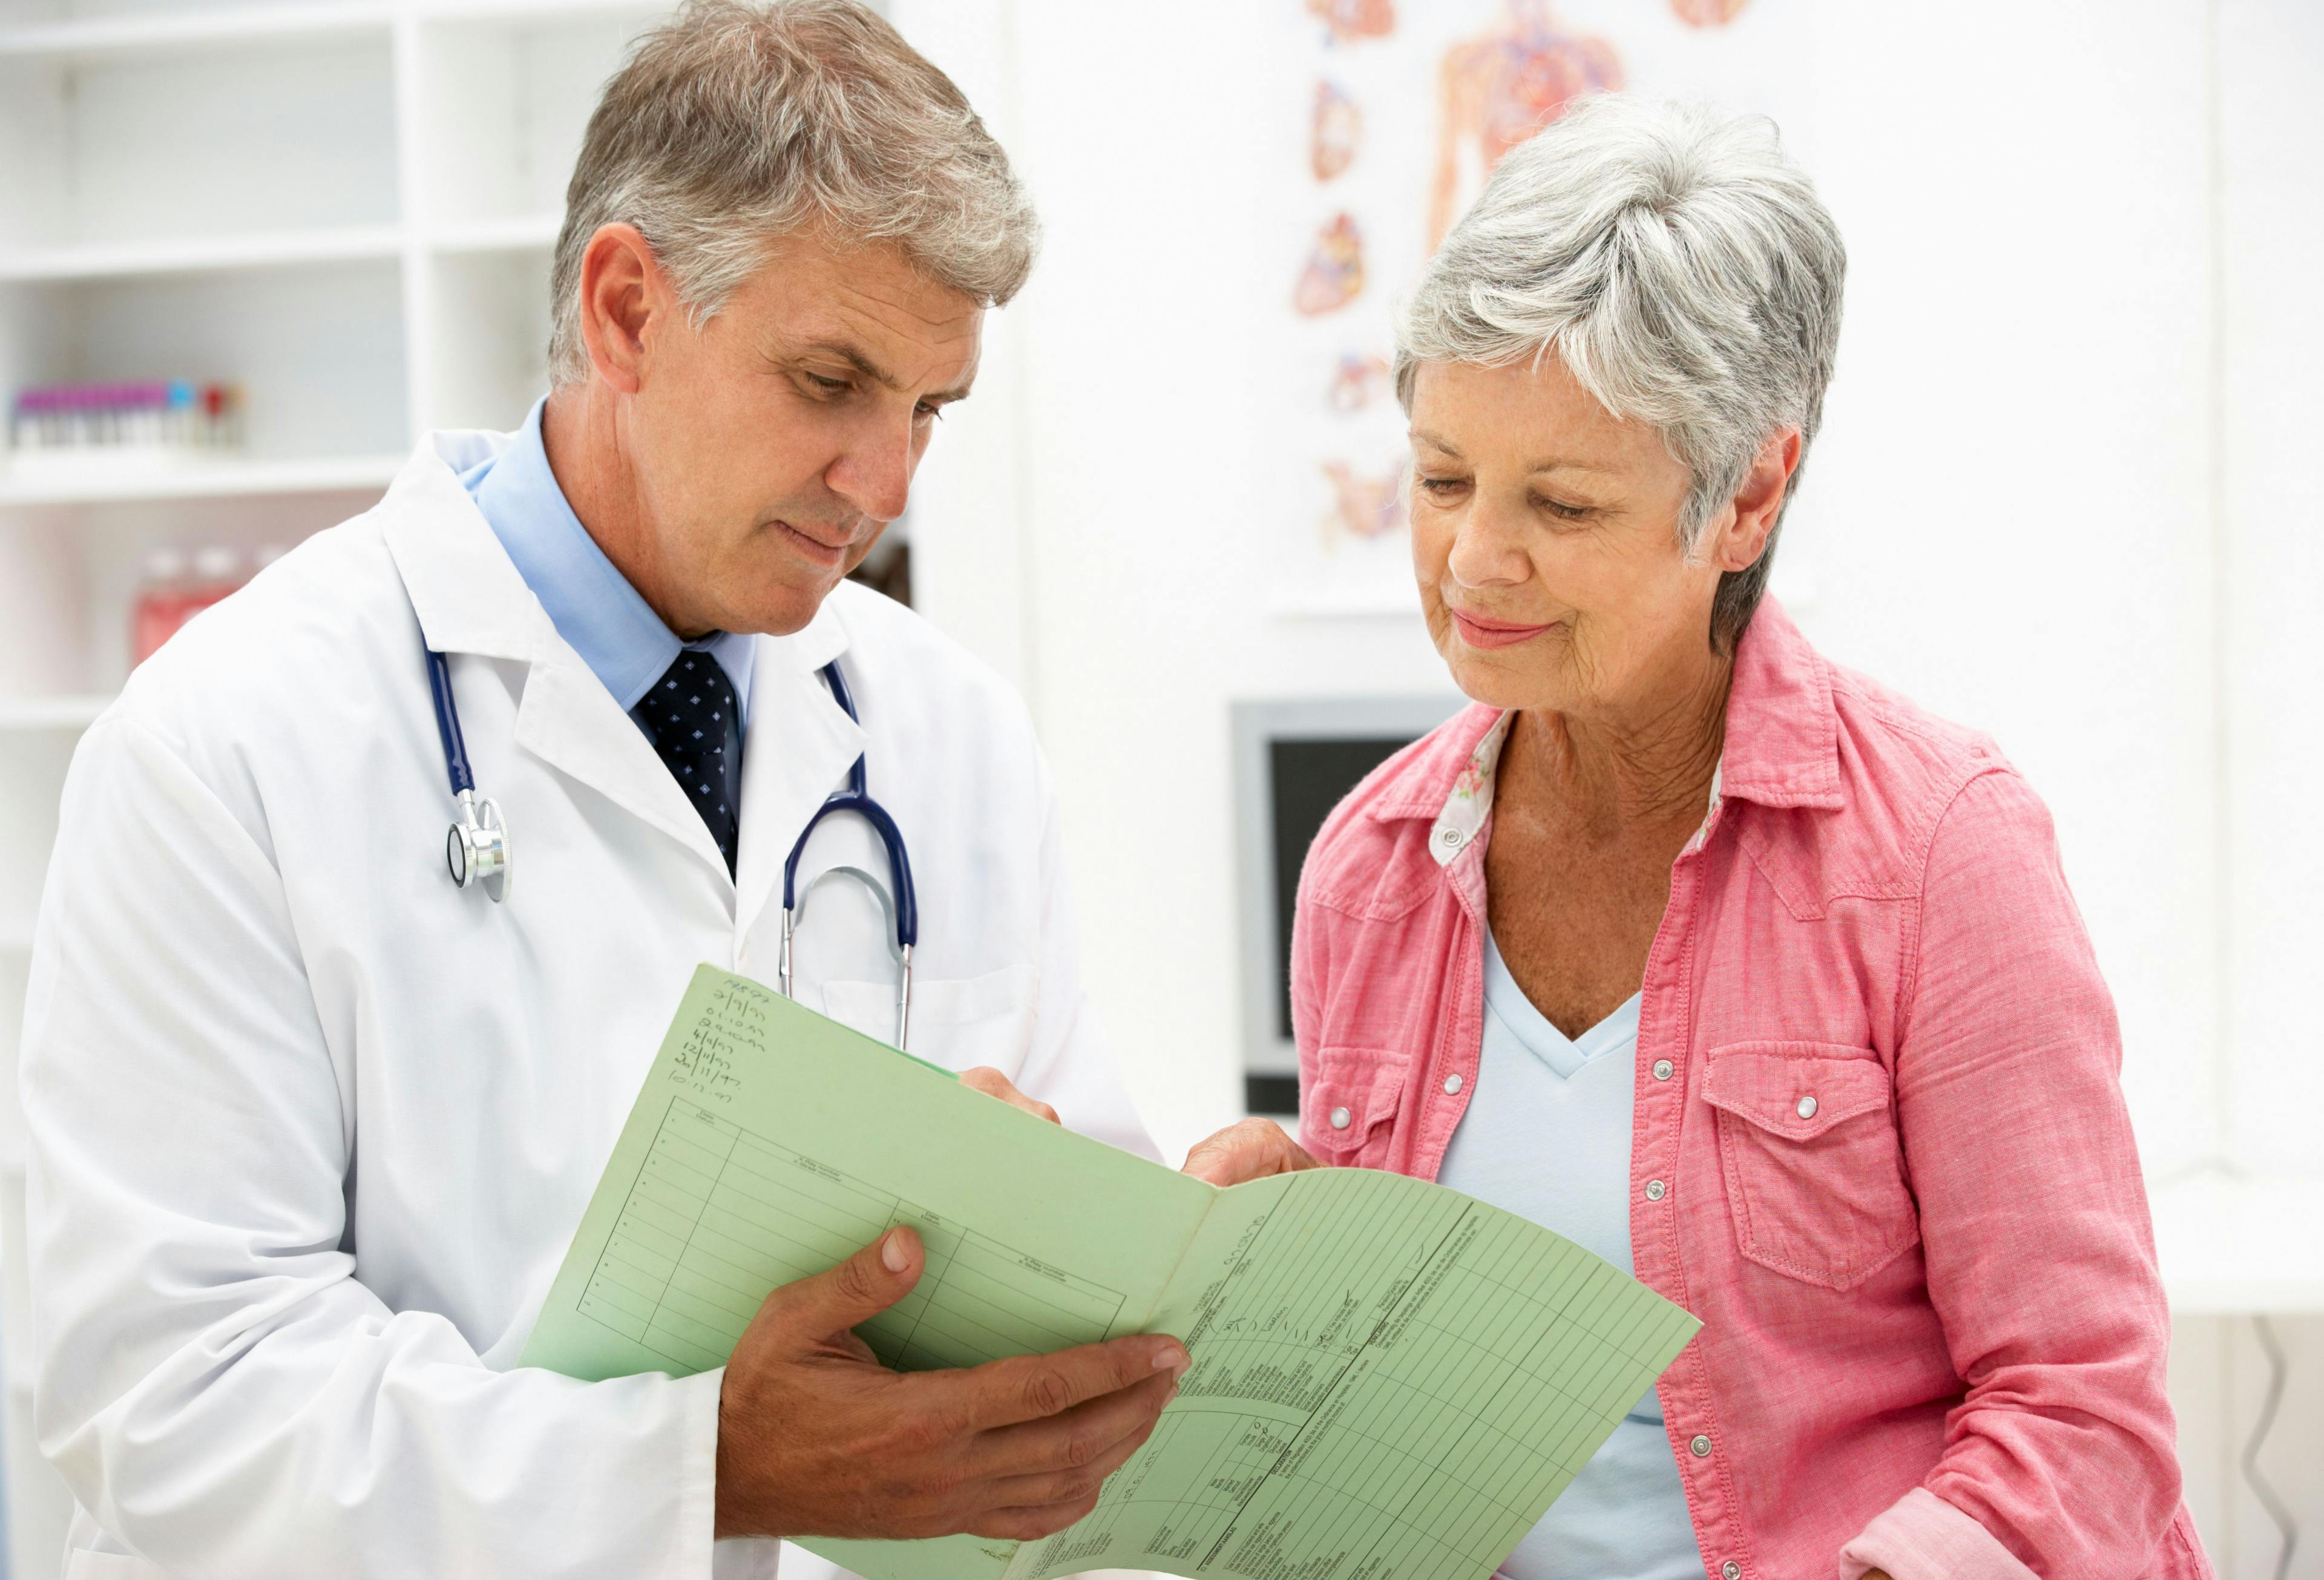 Patient and doctor discussing record